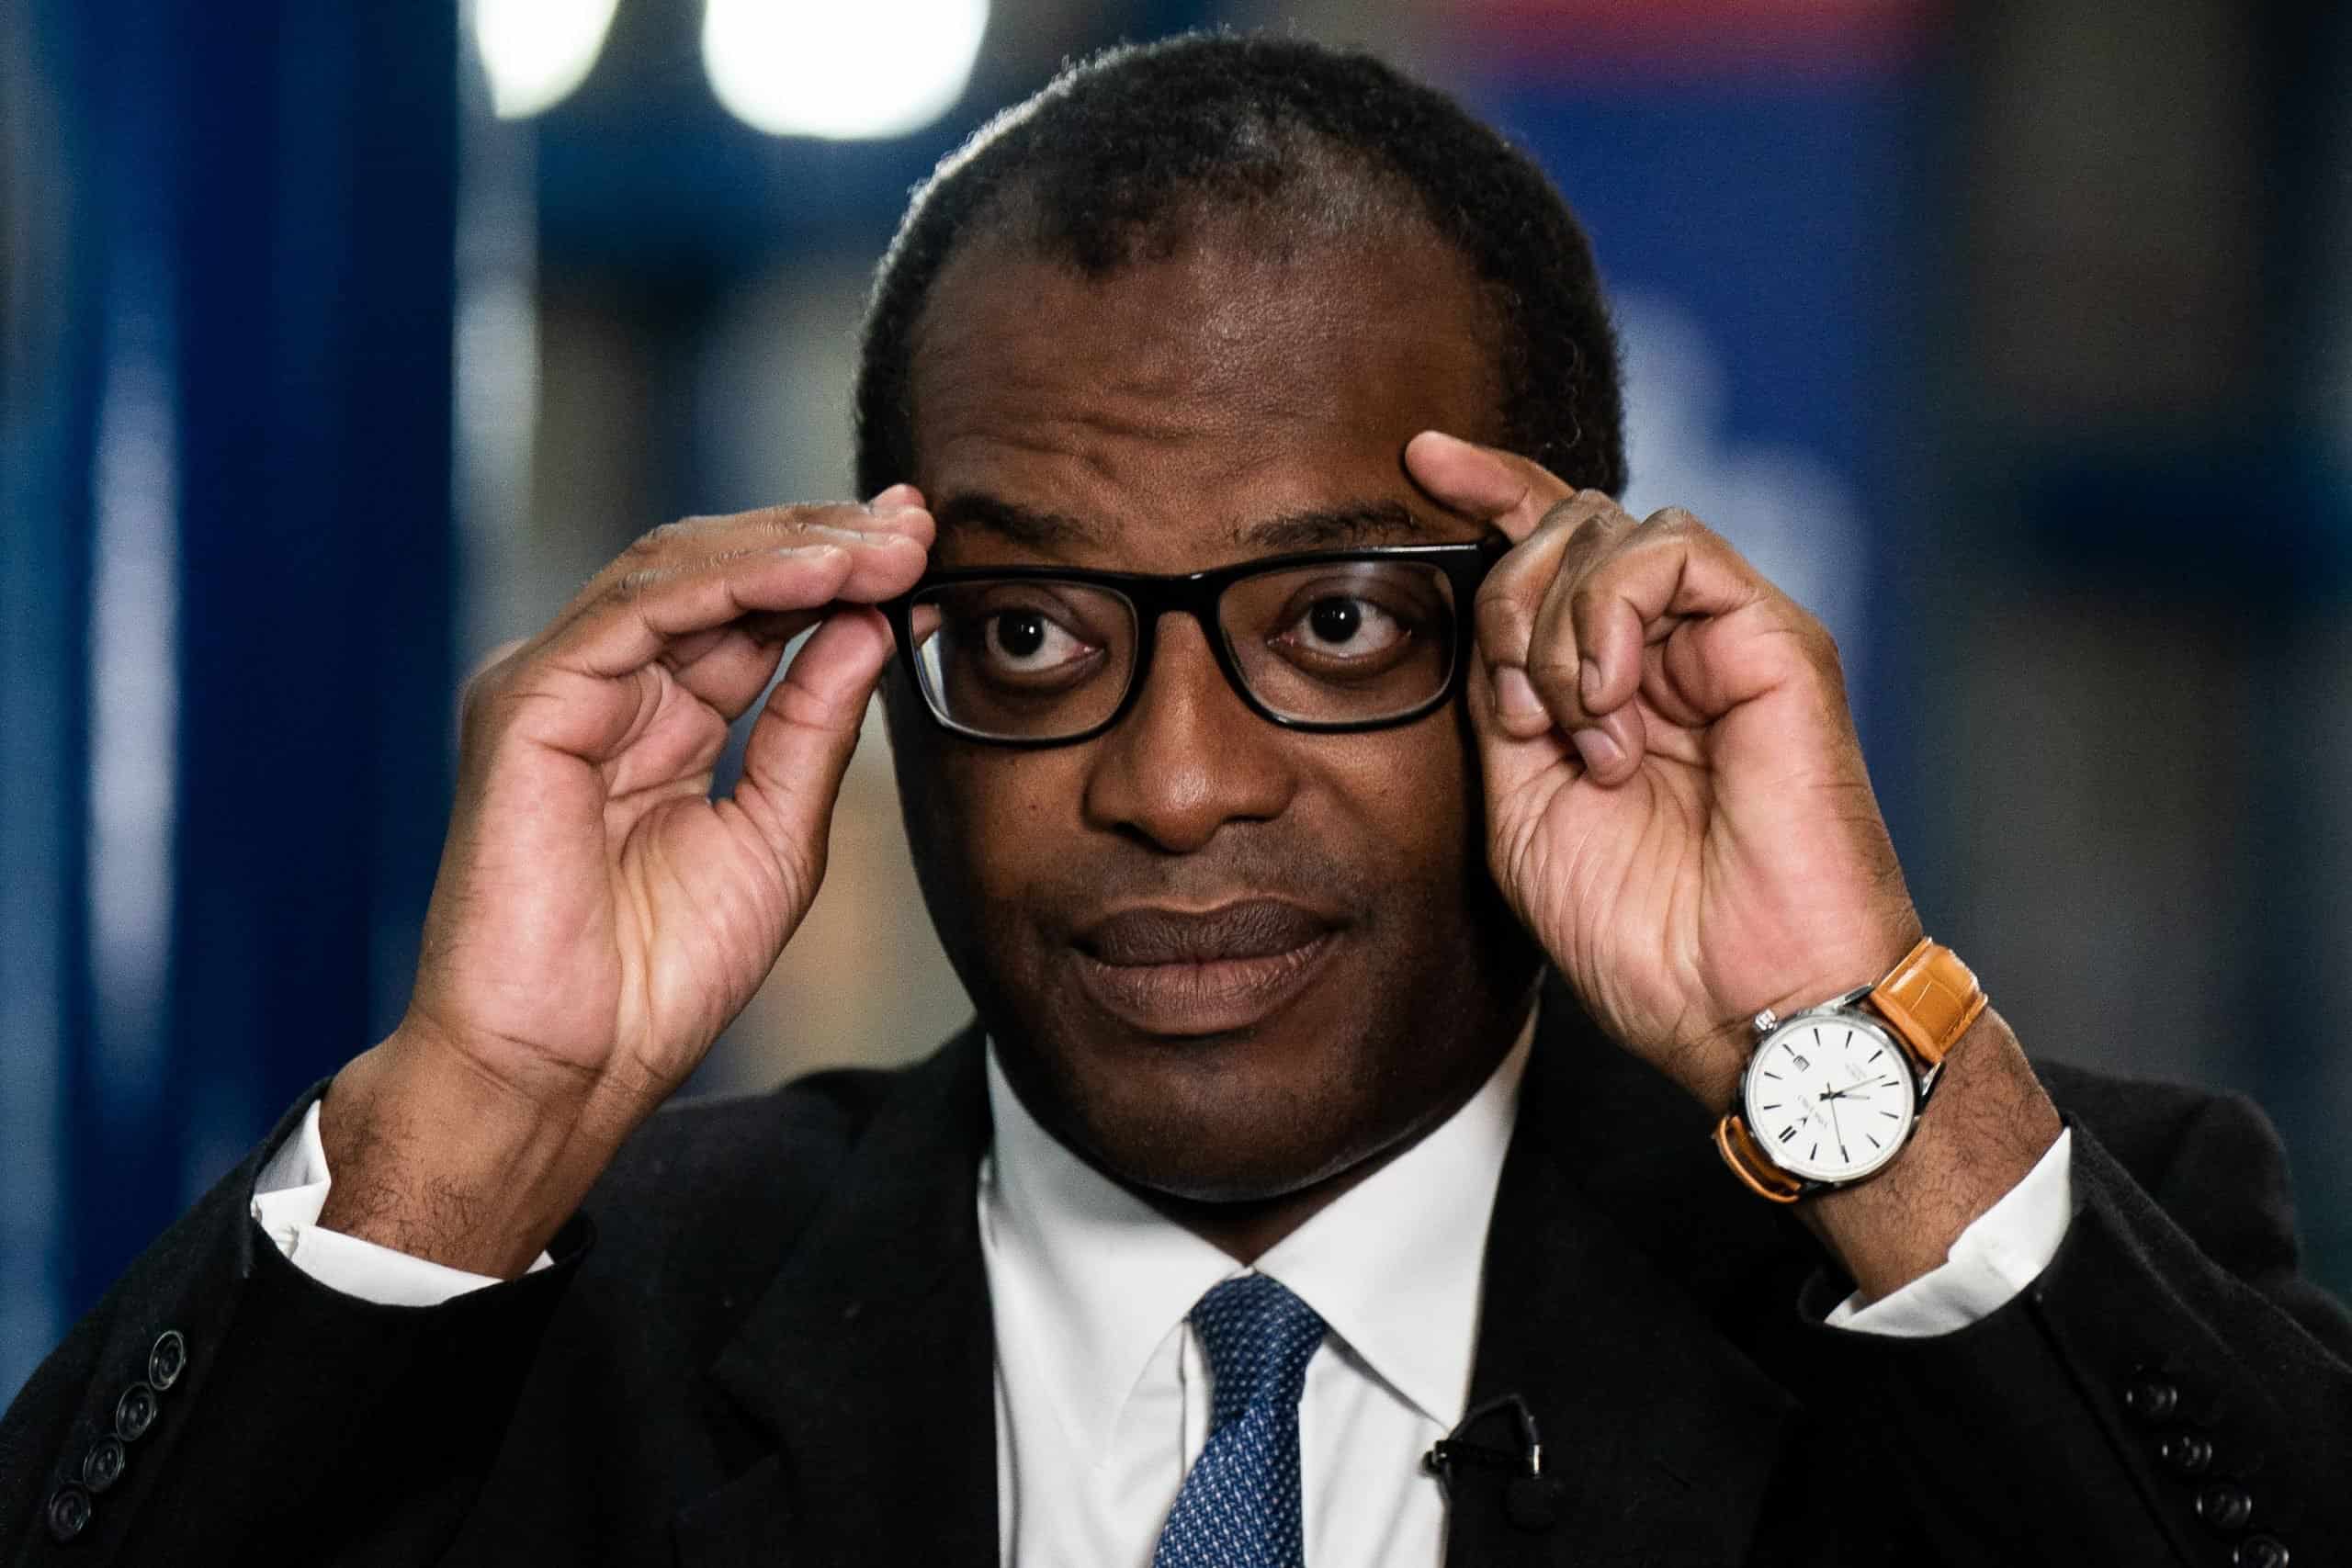 Kwasi Kwarteng: Trying to lower taxes in mini-budget was right